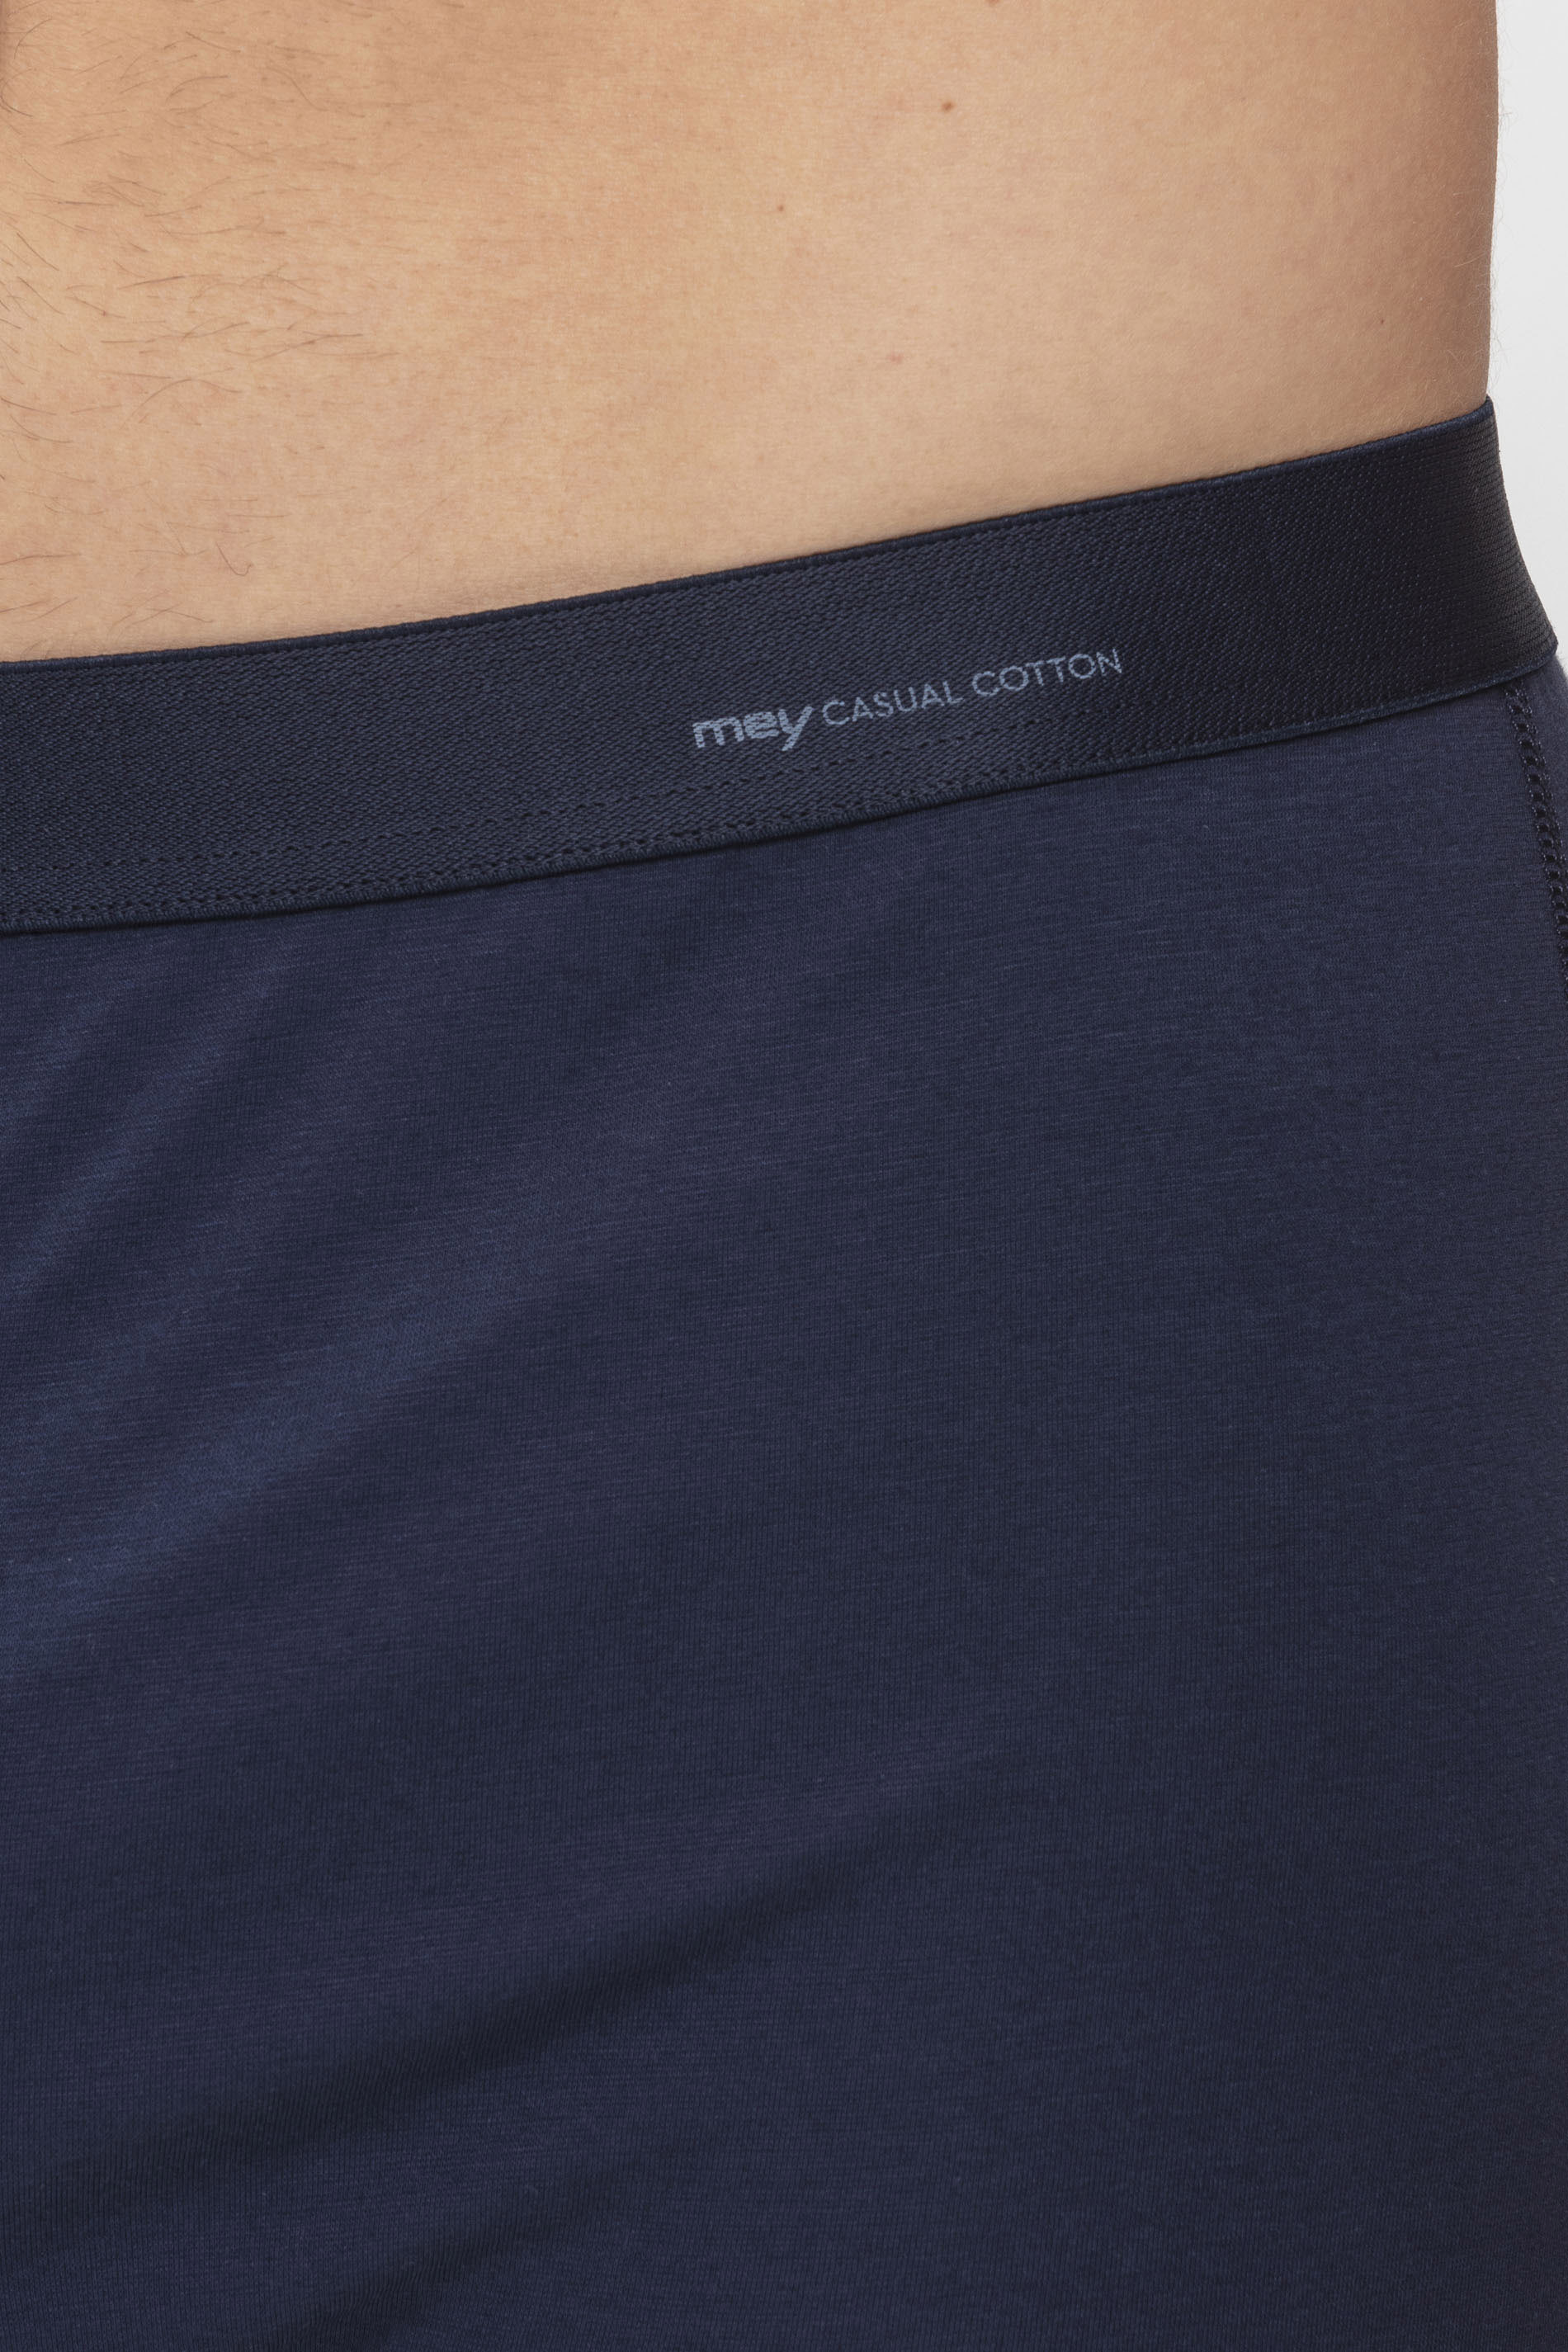 Trunk shorts Yacht Blue Serie Casual Cotton Detailweergave 01 | mey®